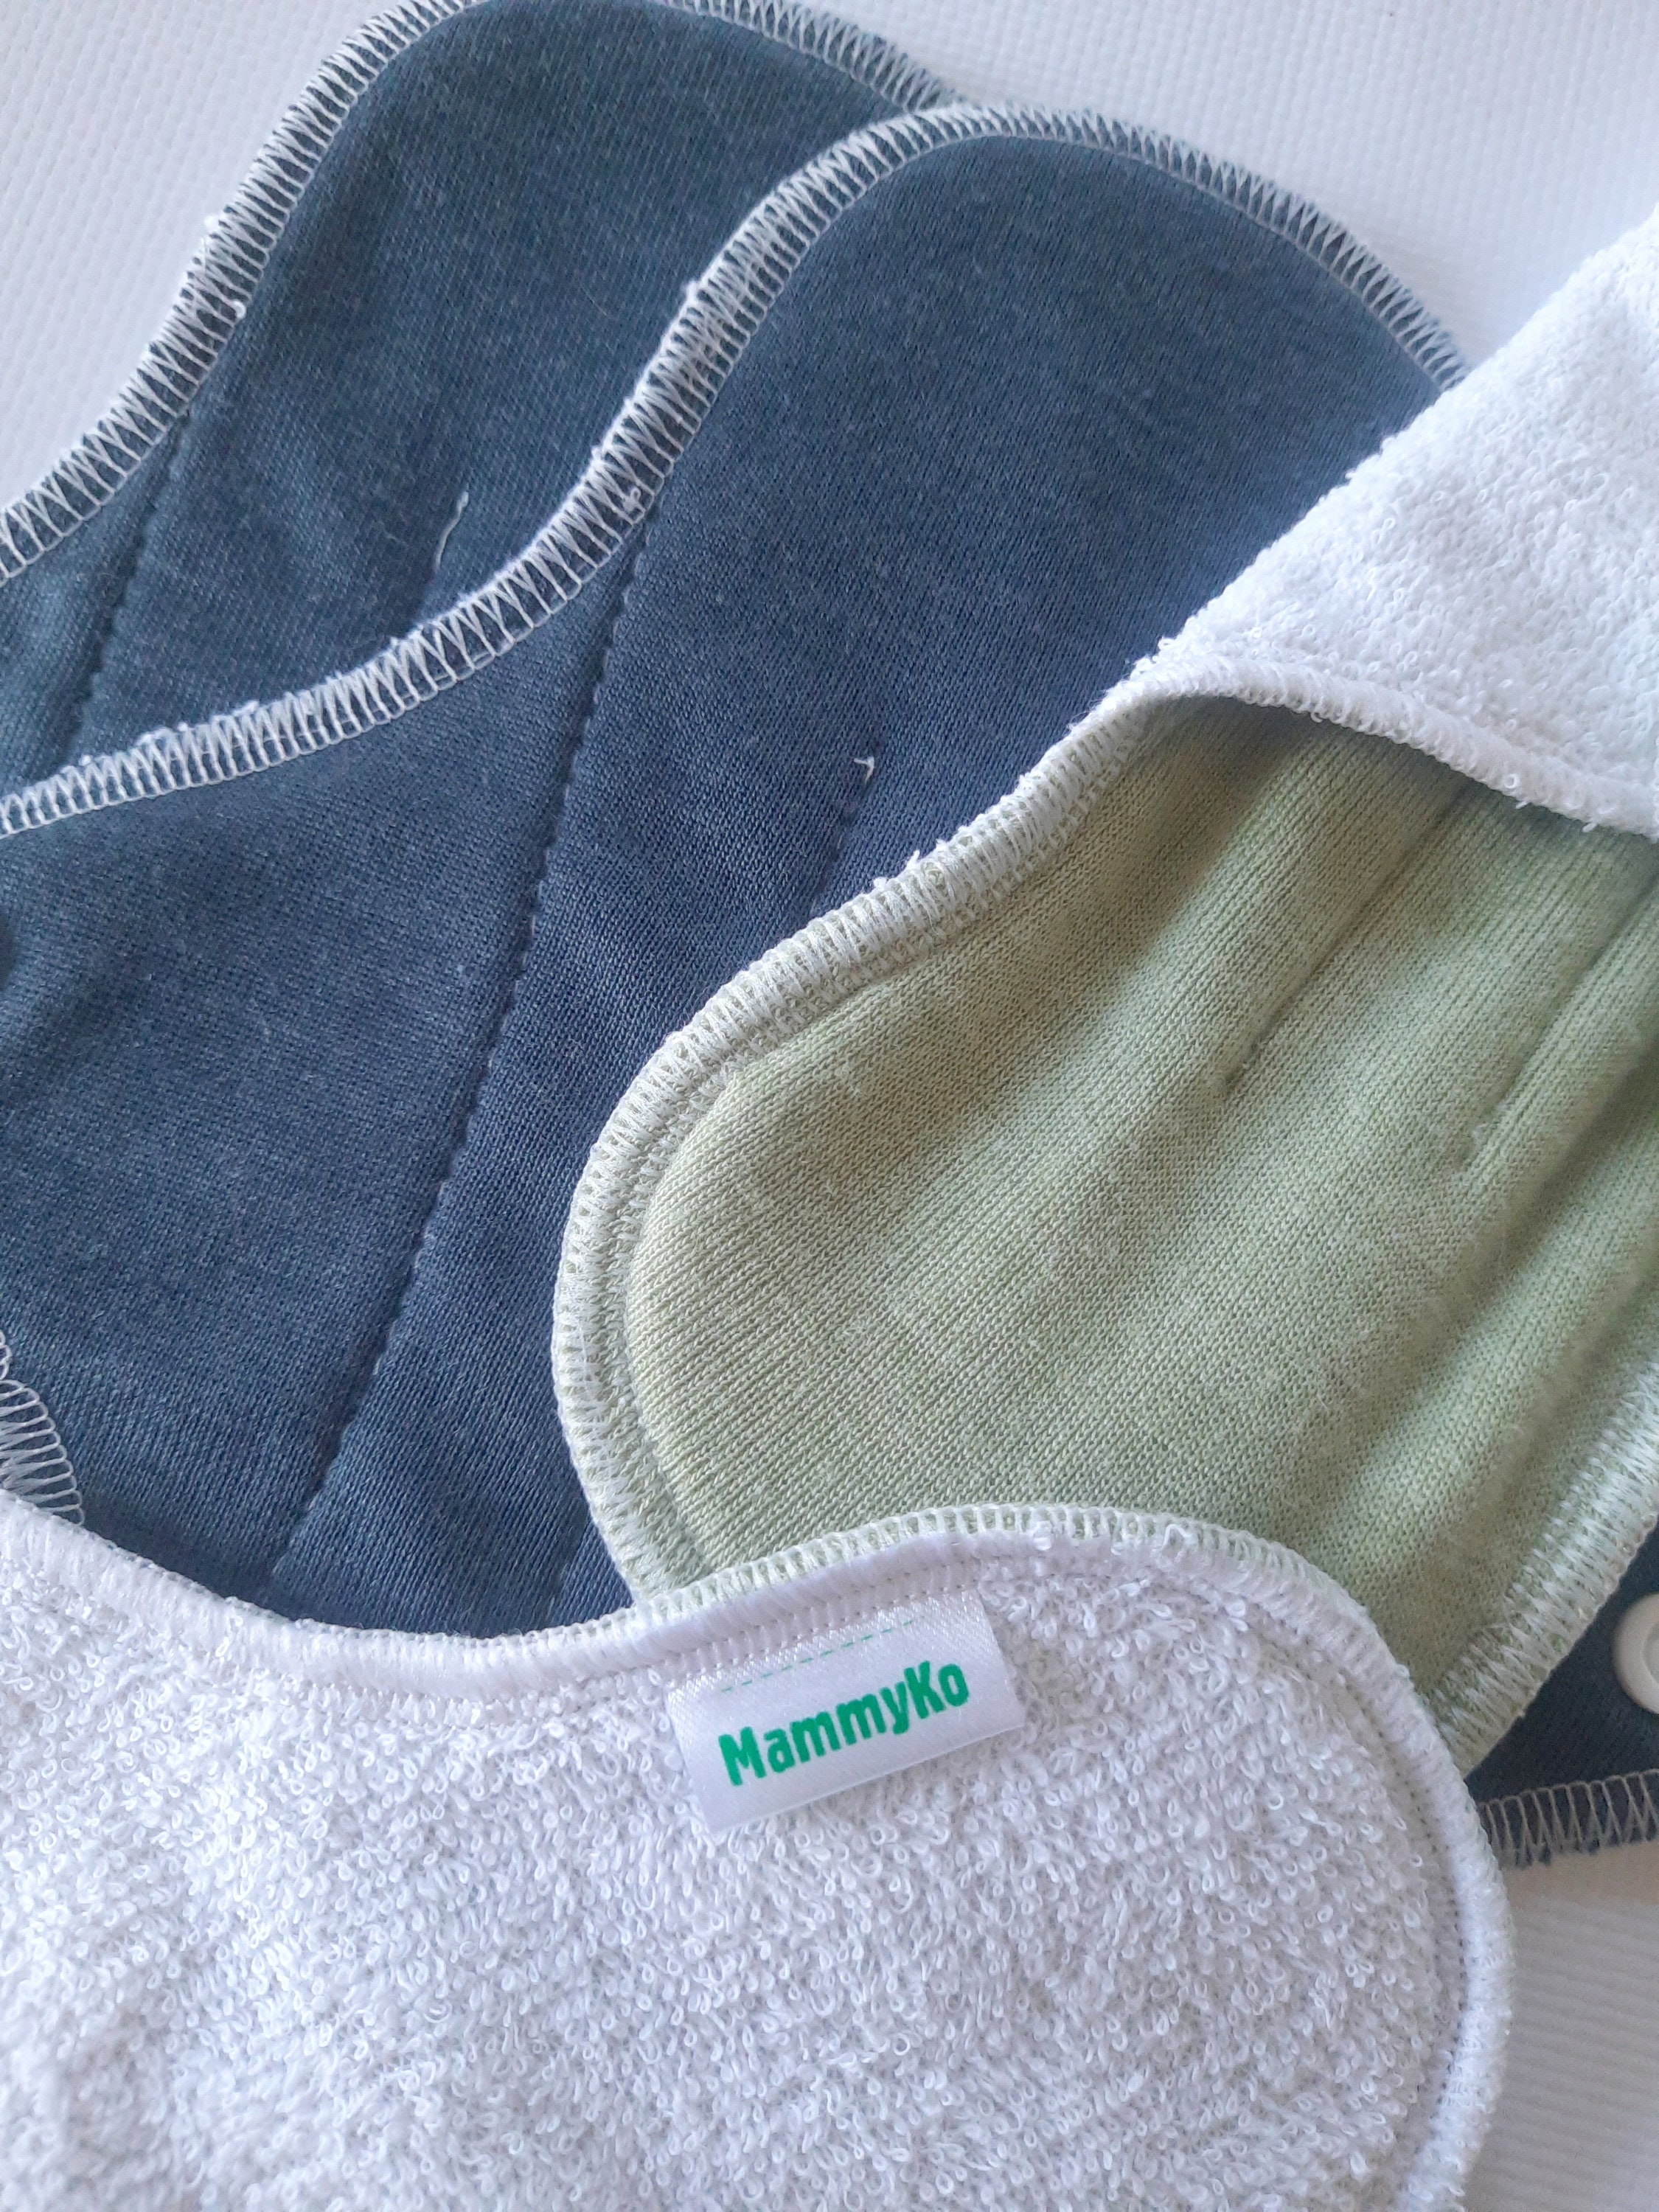 Merino Wool With Silk Reusable Period Pads. Cloth Pads Starter Set of 4.  Incontinence Pads. 